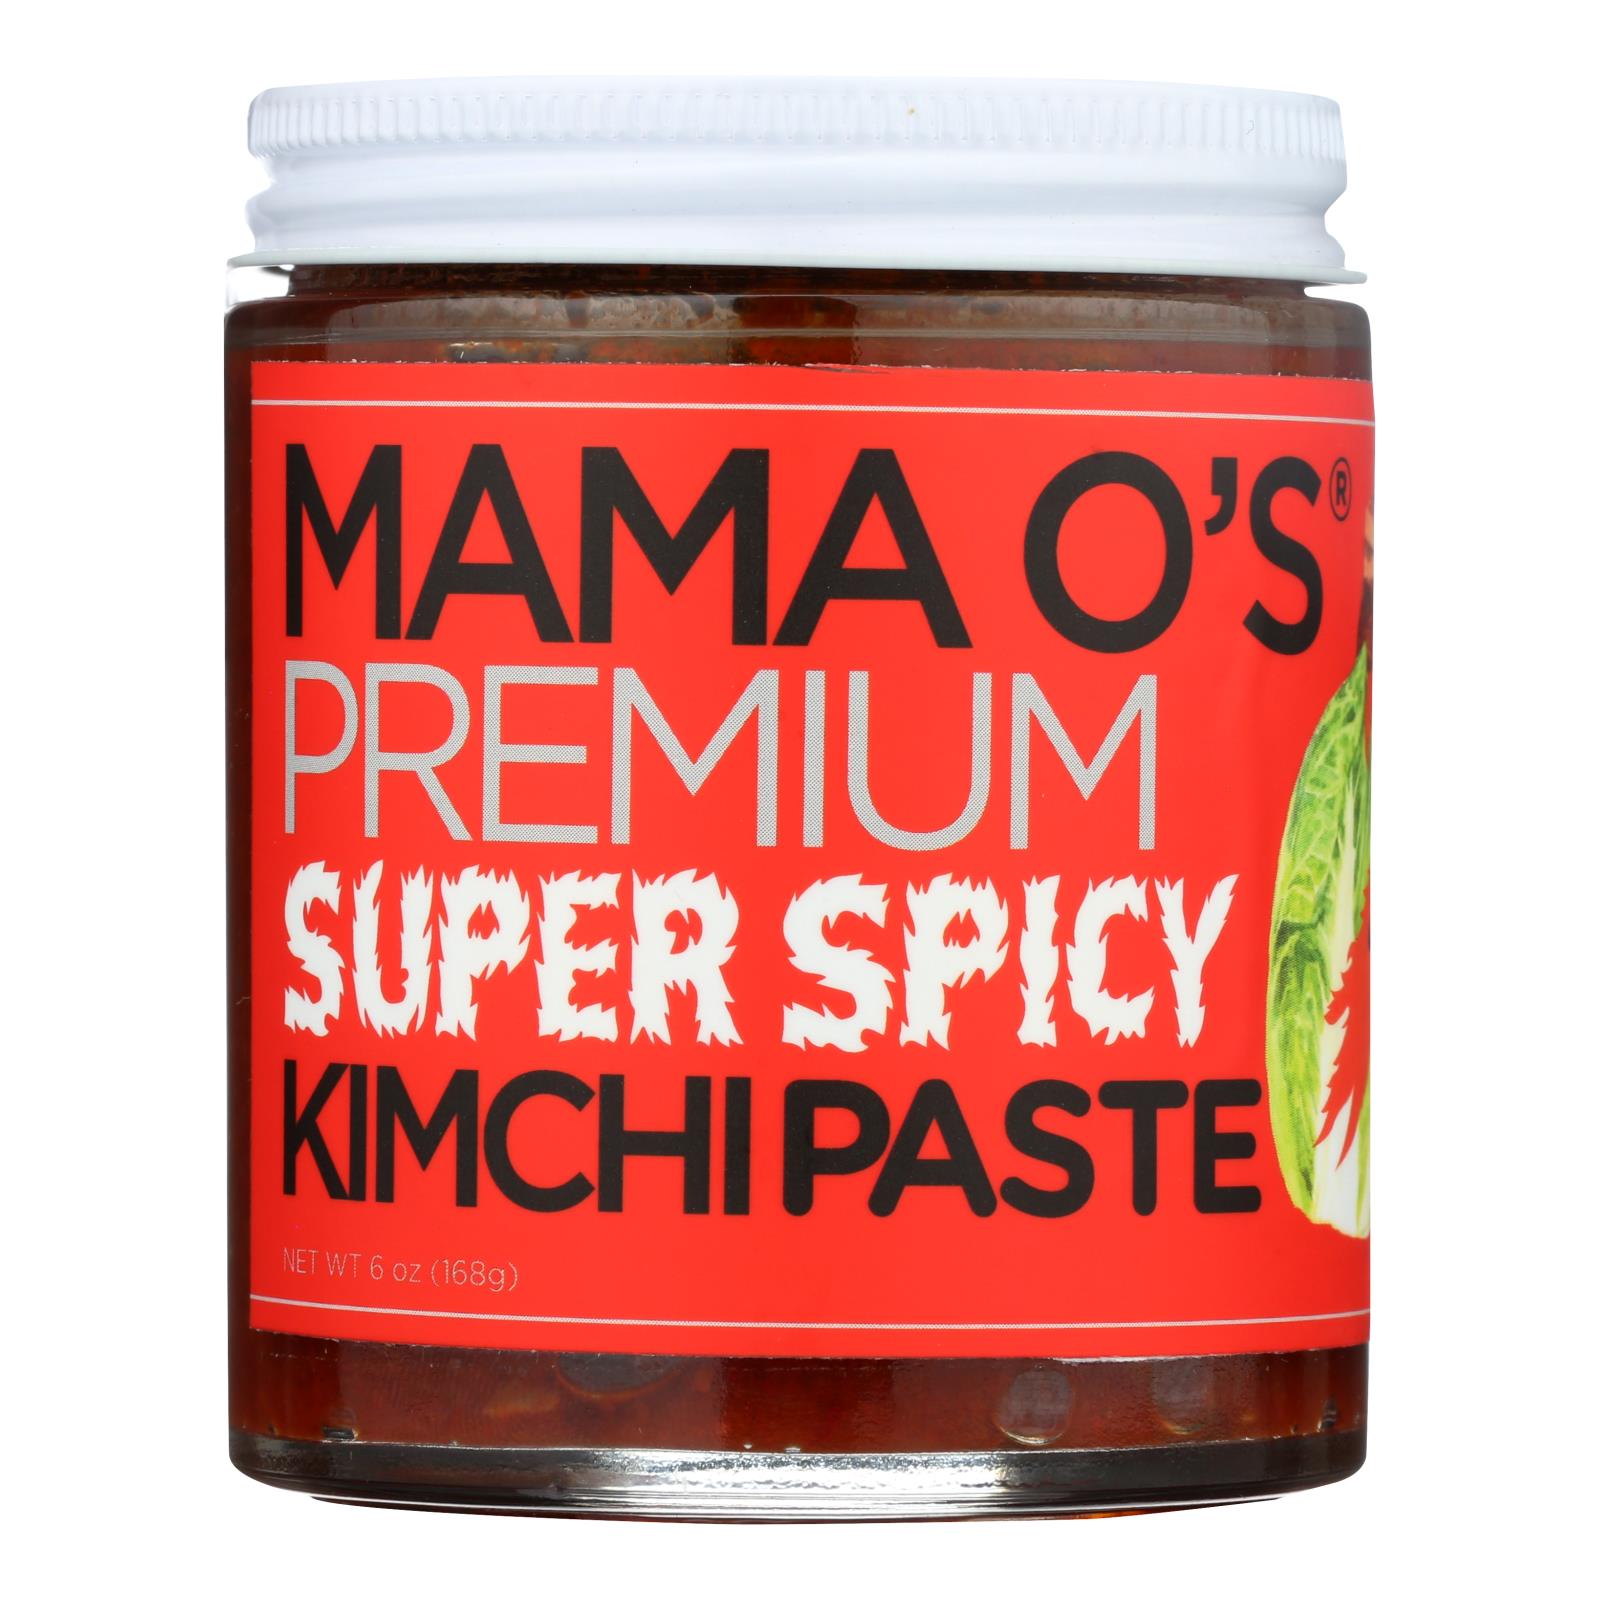 Mama O'S Premium Kimchi, Mama O's Premium Kimchi - Paste Kimchi Spr Spicy Vgn - Case of 6 - 6 OZ (Pack of 6)